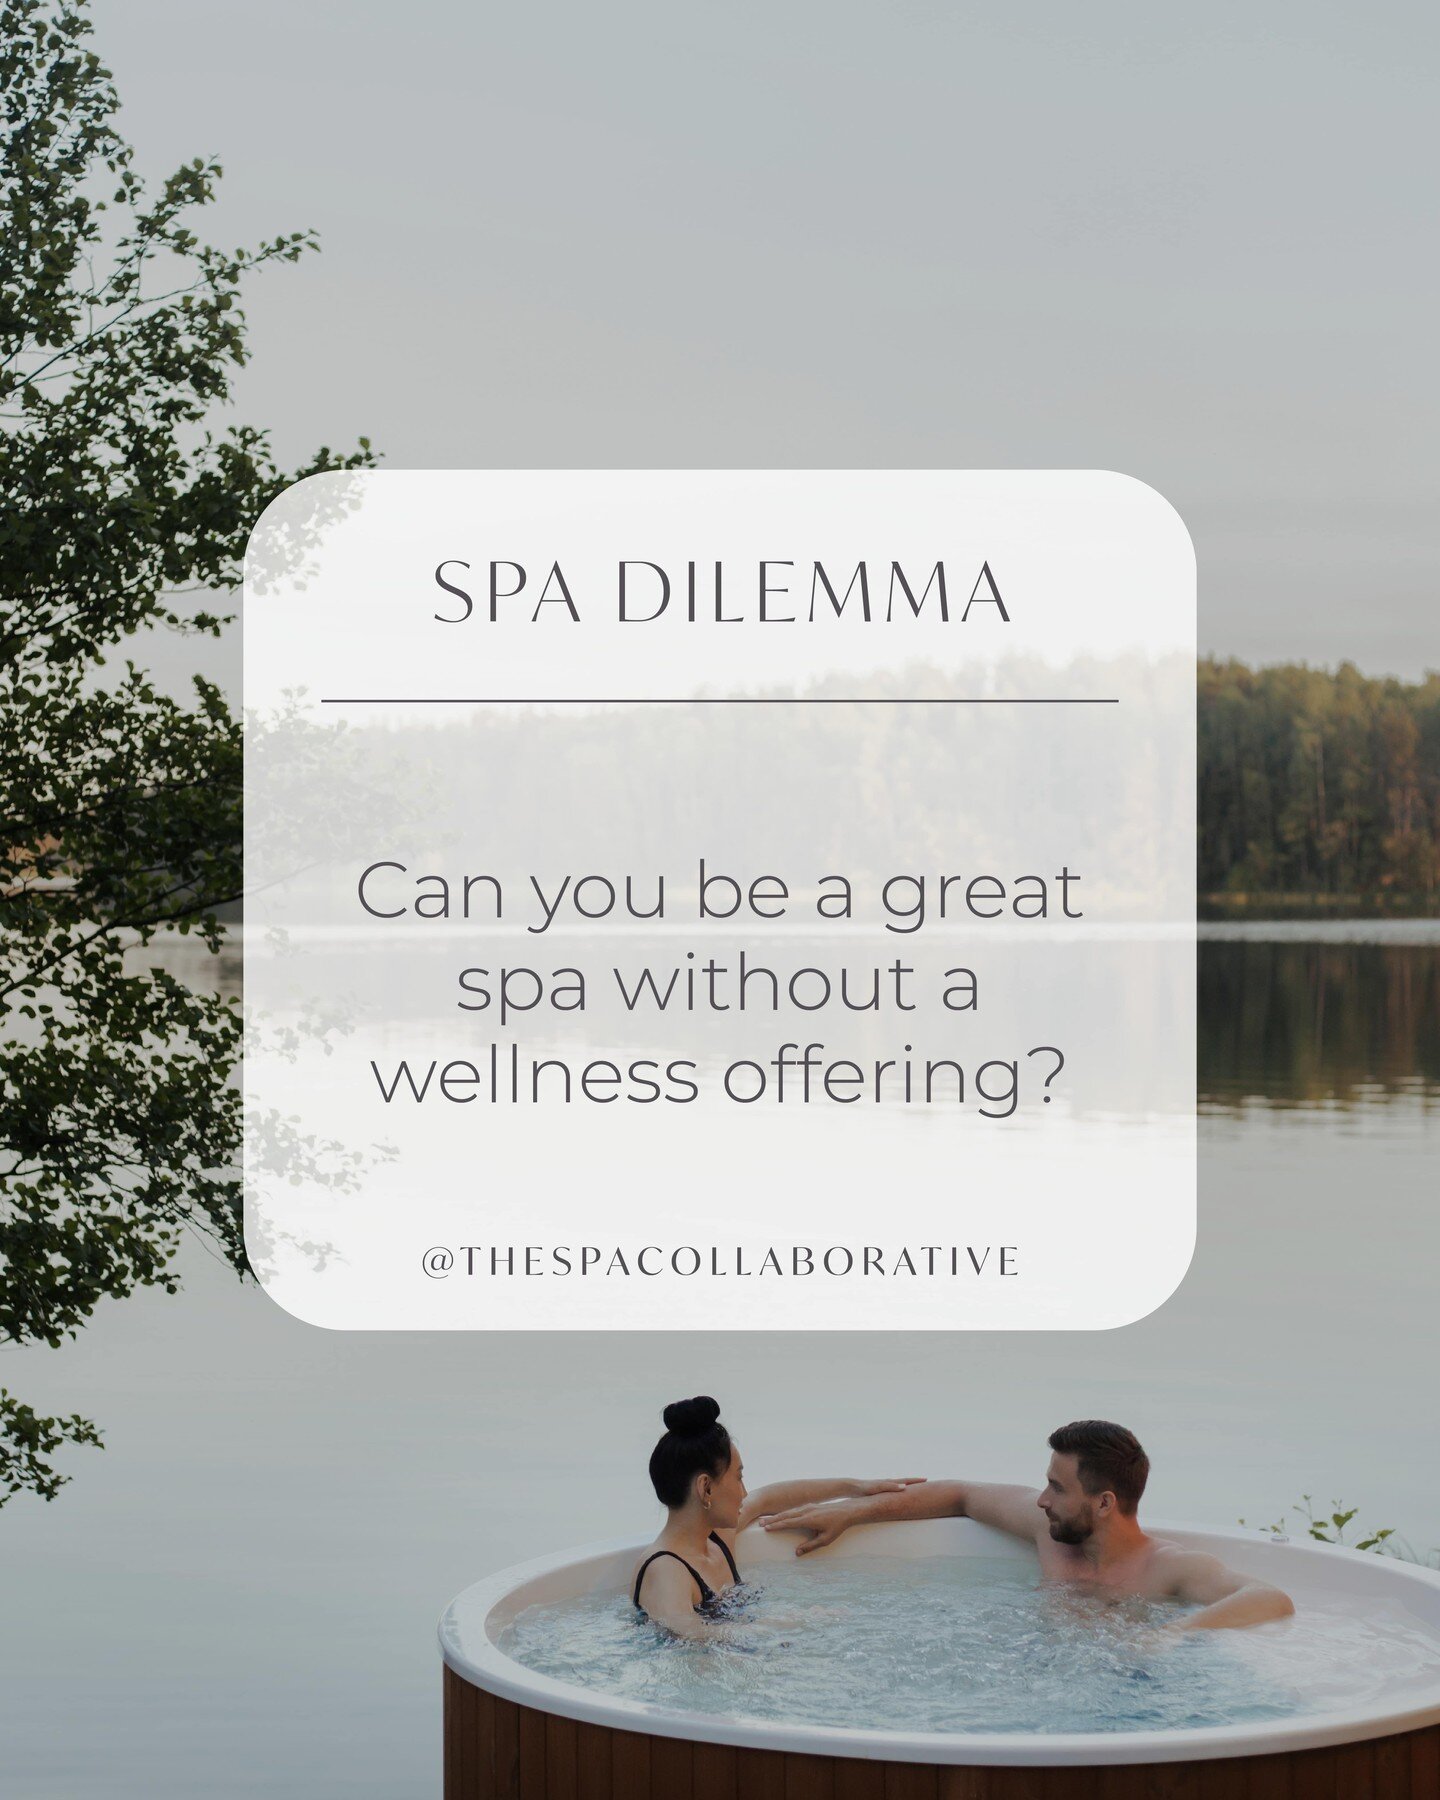 The answer is: yes, yes you can! 💁&zwj;♀️ ✨

While many spas may feel under pressure to develop a wellness offering, the reality is a great massage often accounts for around 80% of total revenue.

Here at The Spa Collaborative, we believe those who 